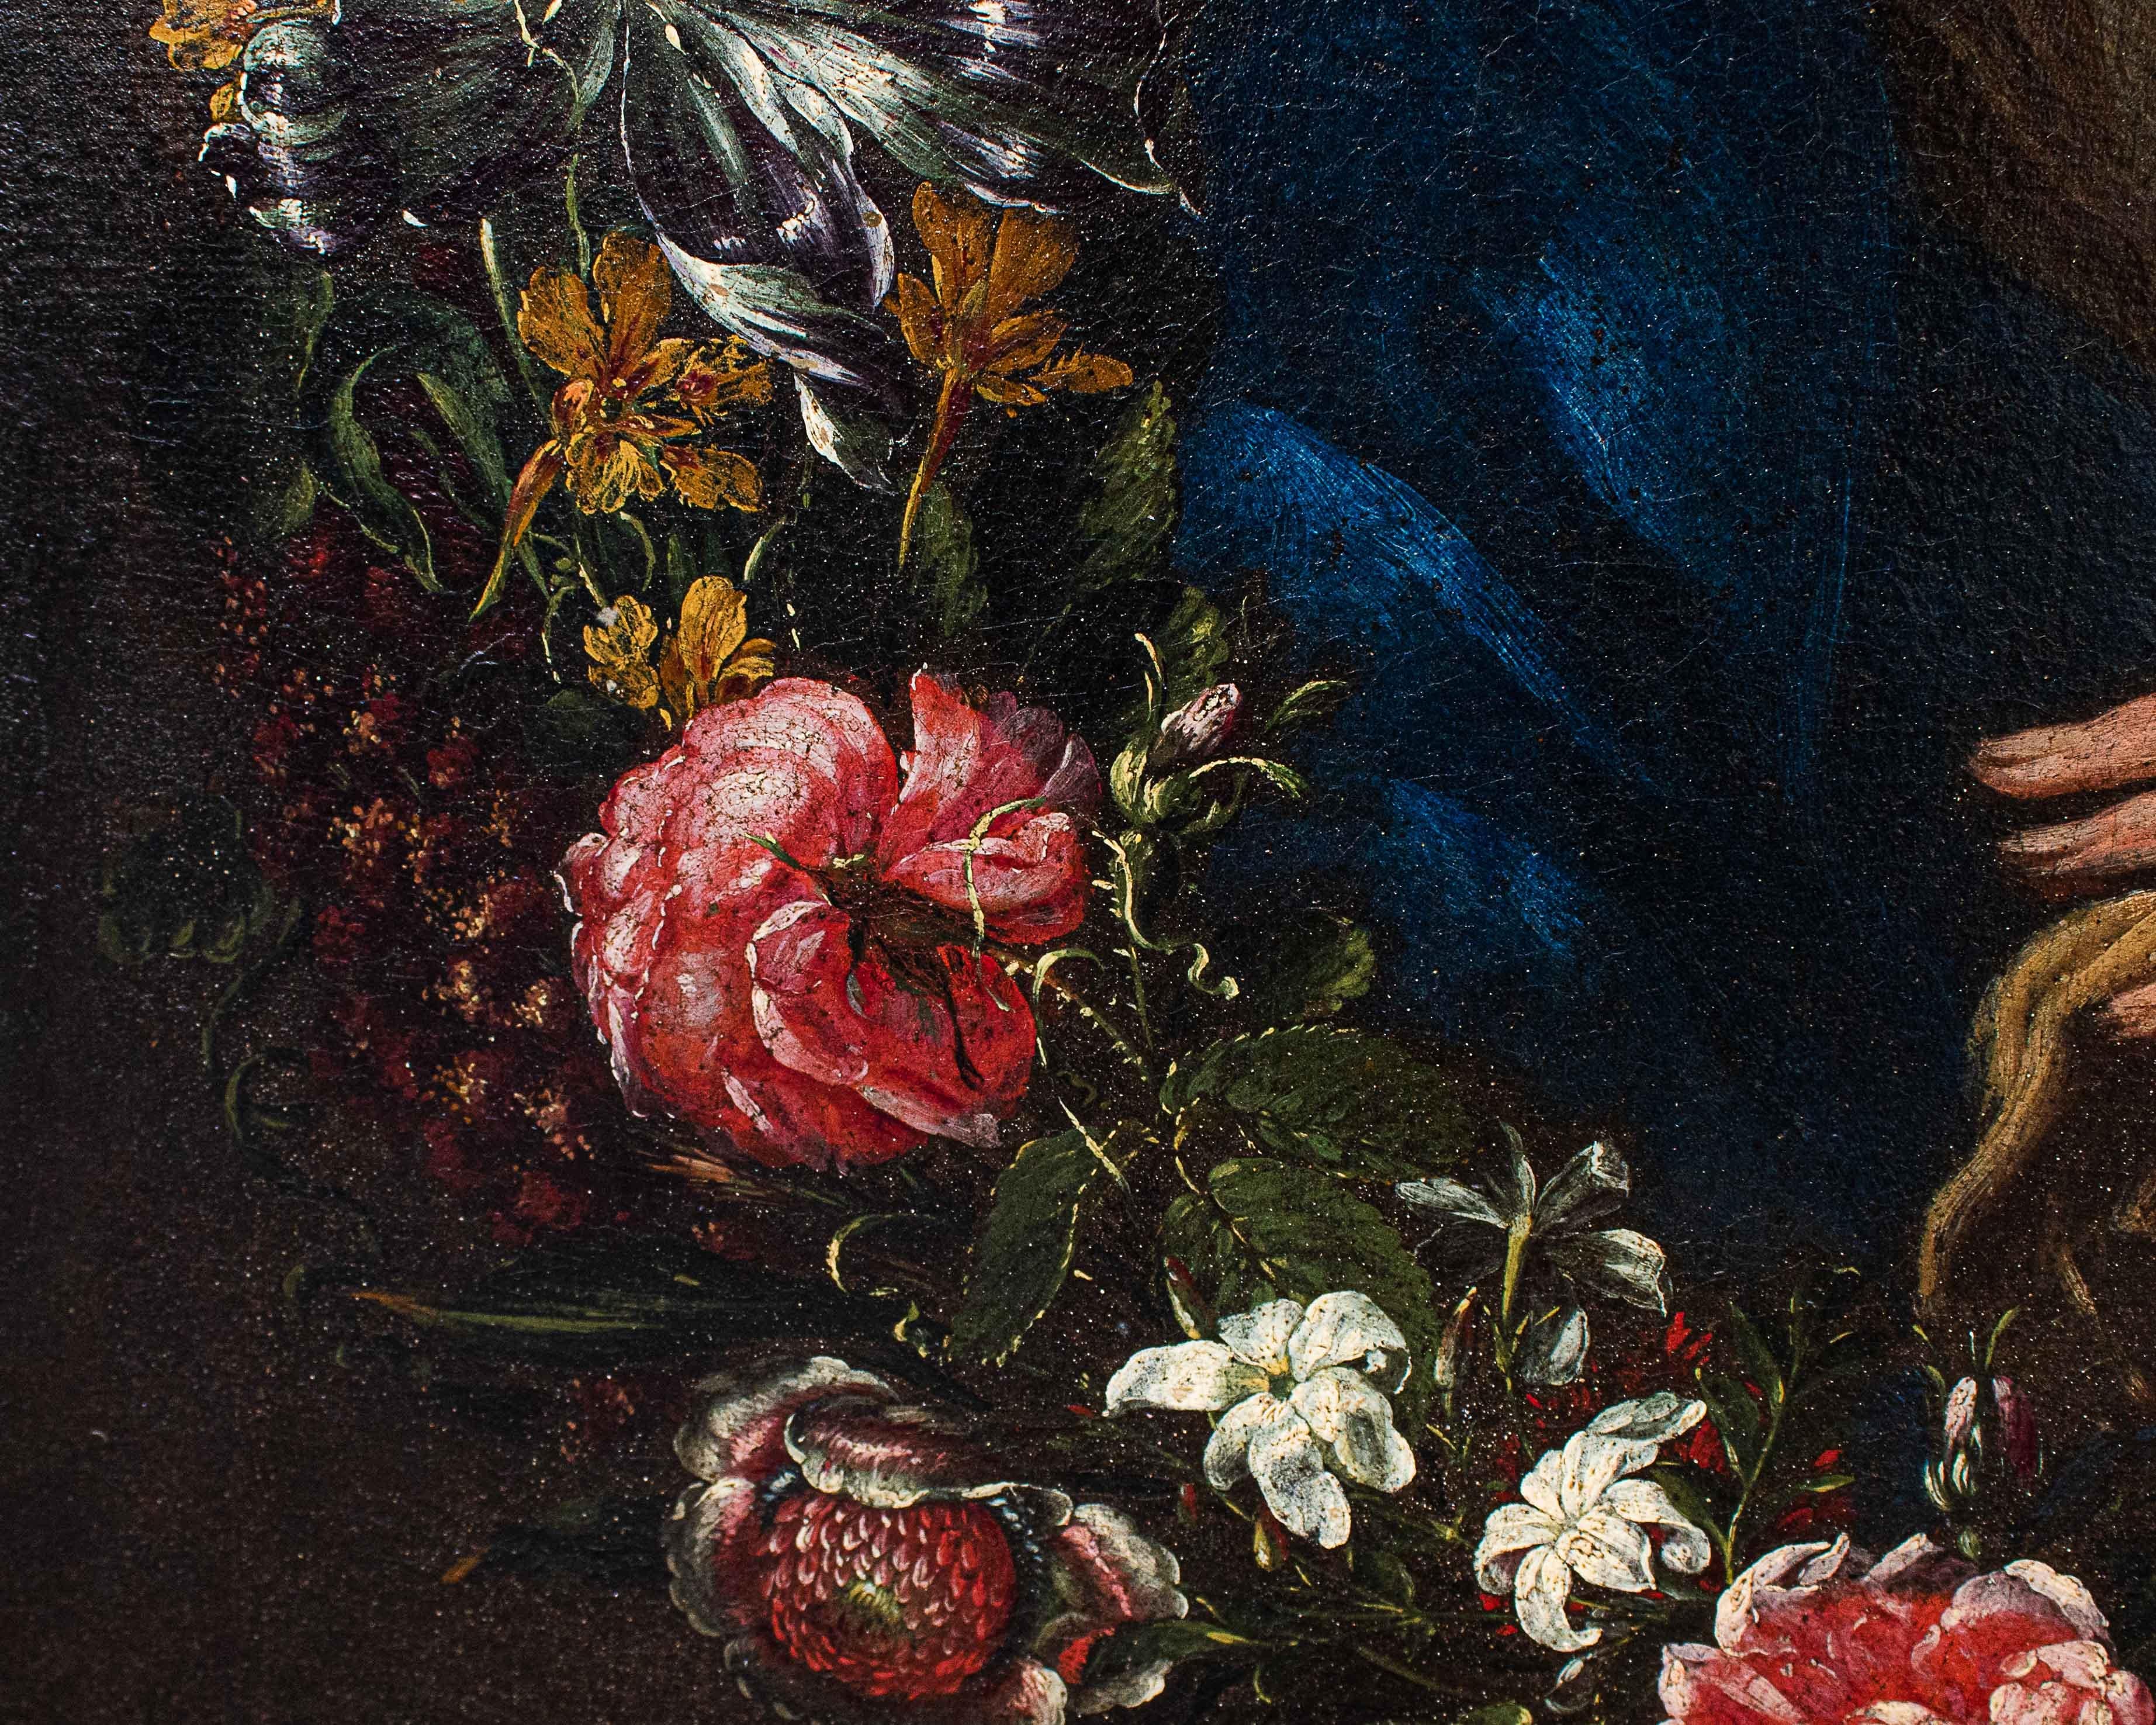 17th-18th Century Virgin with in Garland of Flowers Painting Oil on Canvas 9